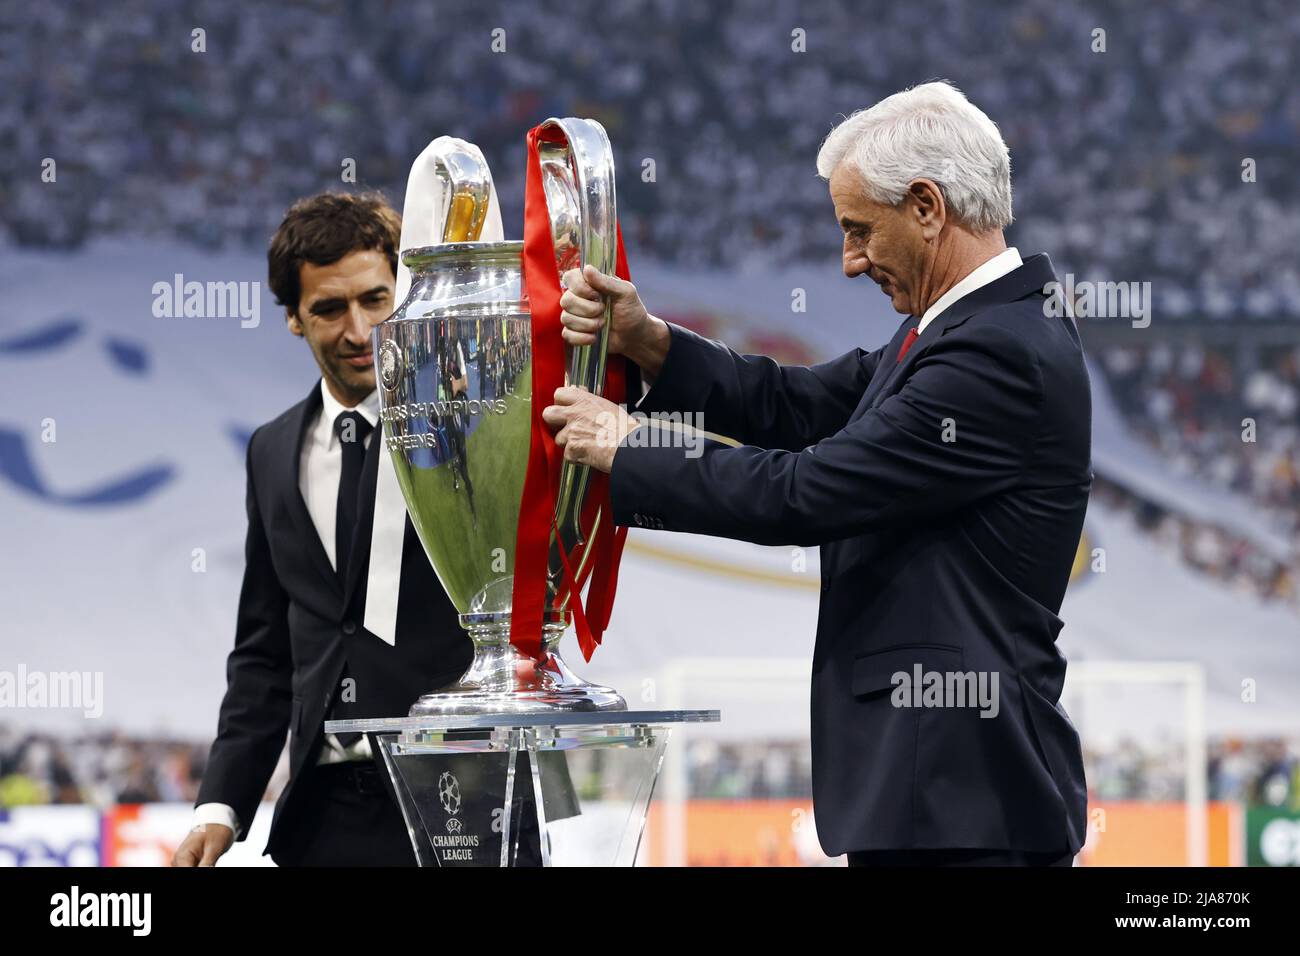 Paris, France. 28th May, 2022. PARIS - (lr) Raul Gonzalez Blanco and Ian Rush with UEFA Champions League trophy, Coupe des clubs Champions Europeans during the UEFA Champions League final match between Liverpool FC and Real Madrid at Stade de Franc on May 28, 2022 in Paris, France. ANP | DUTCH HEIGHT | MAURICE VAN STONE Credit: ANP/Alamy Live News Stock Photo